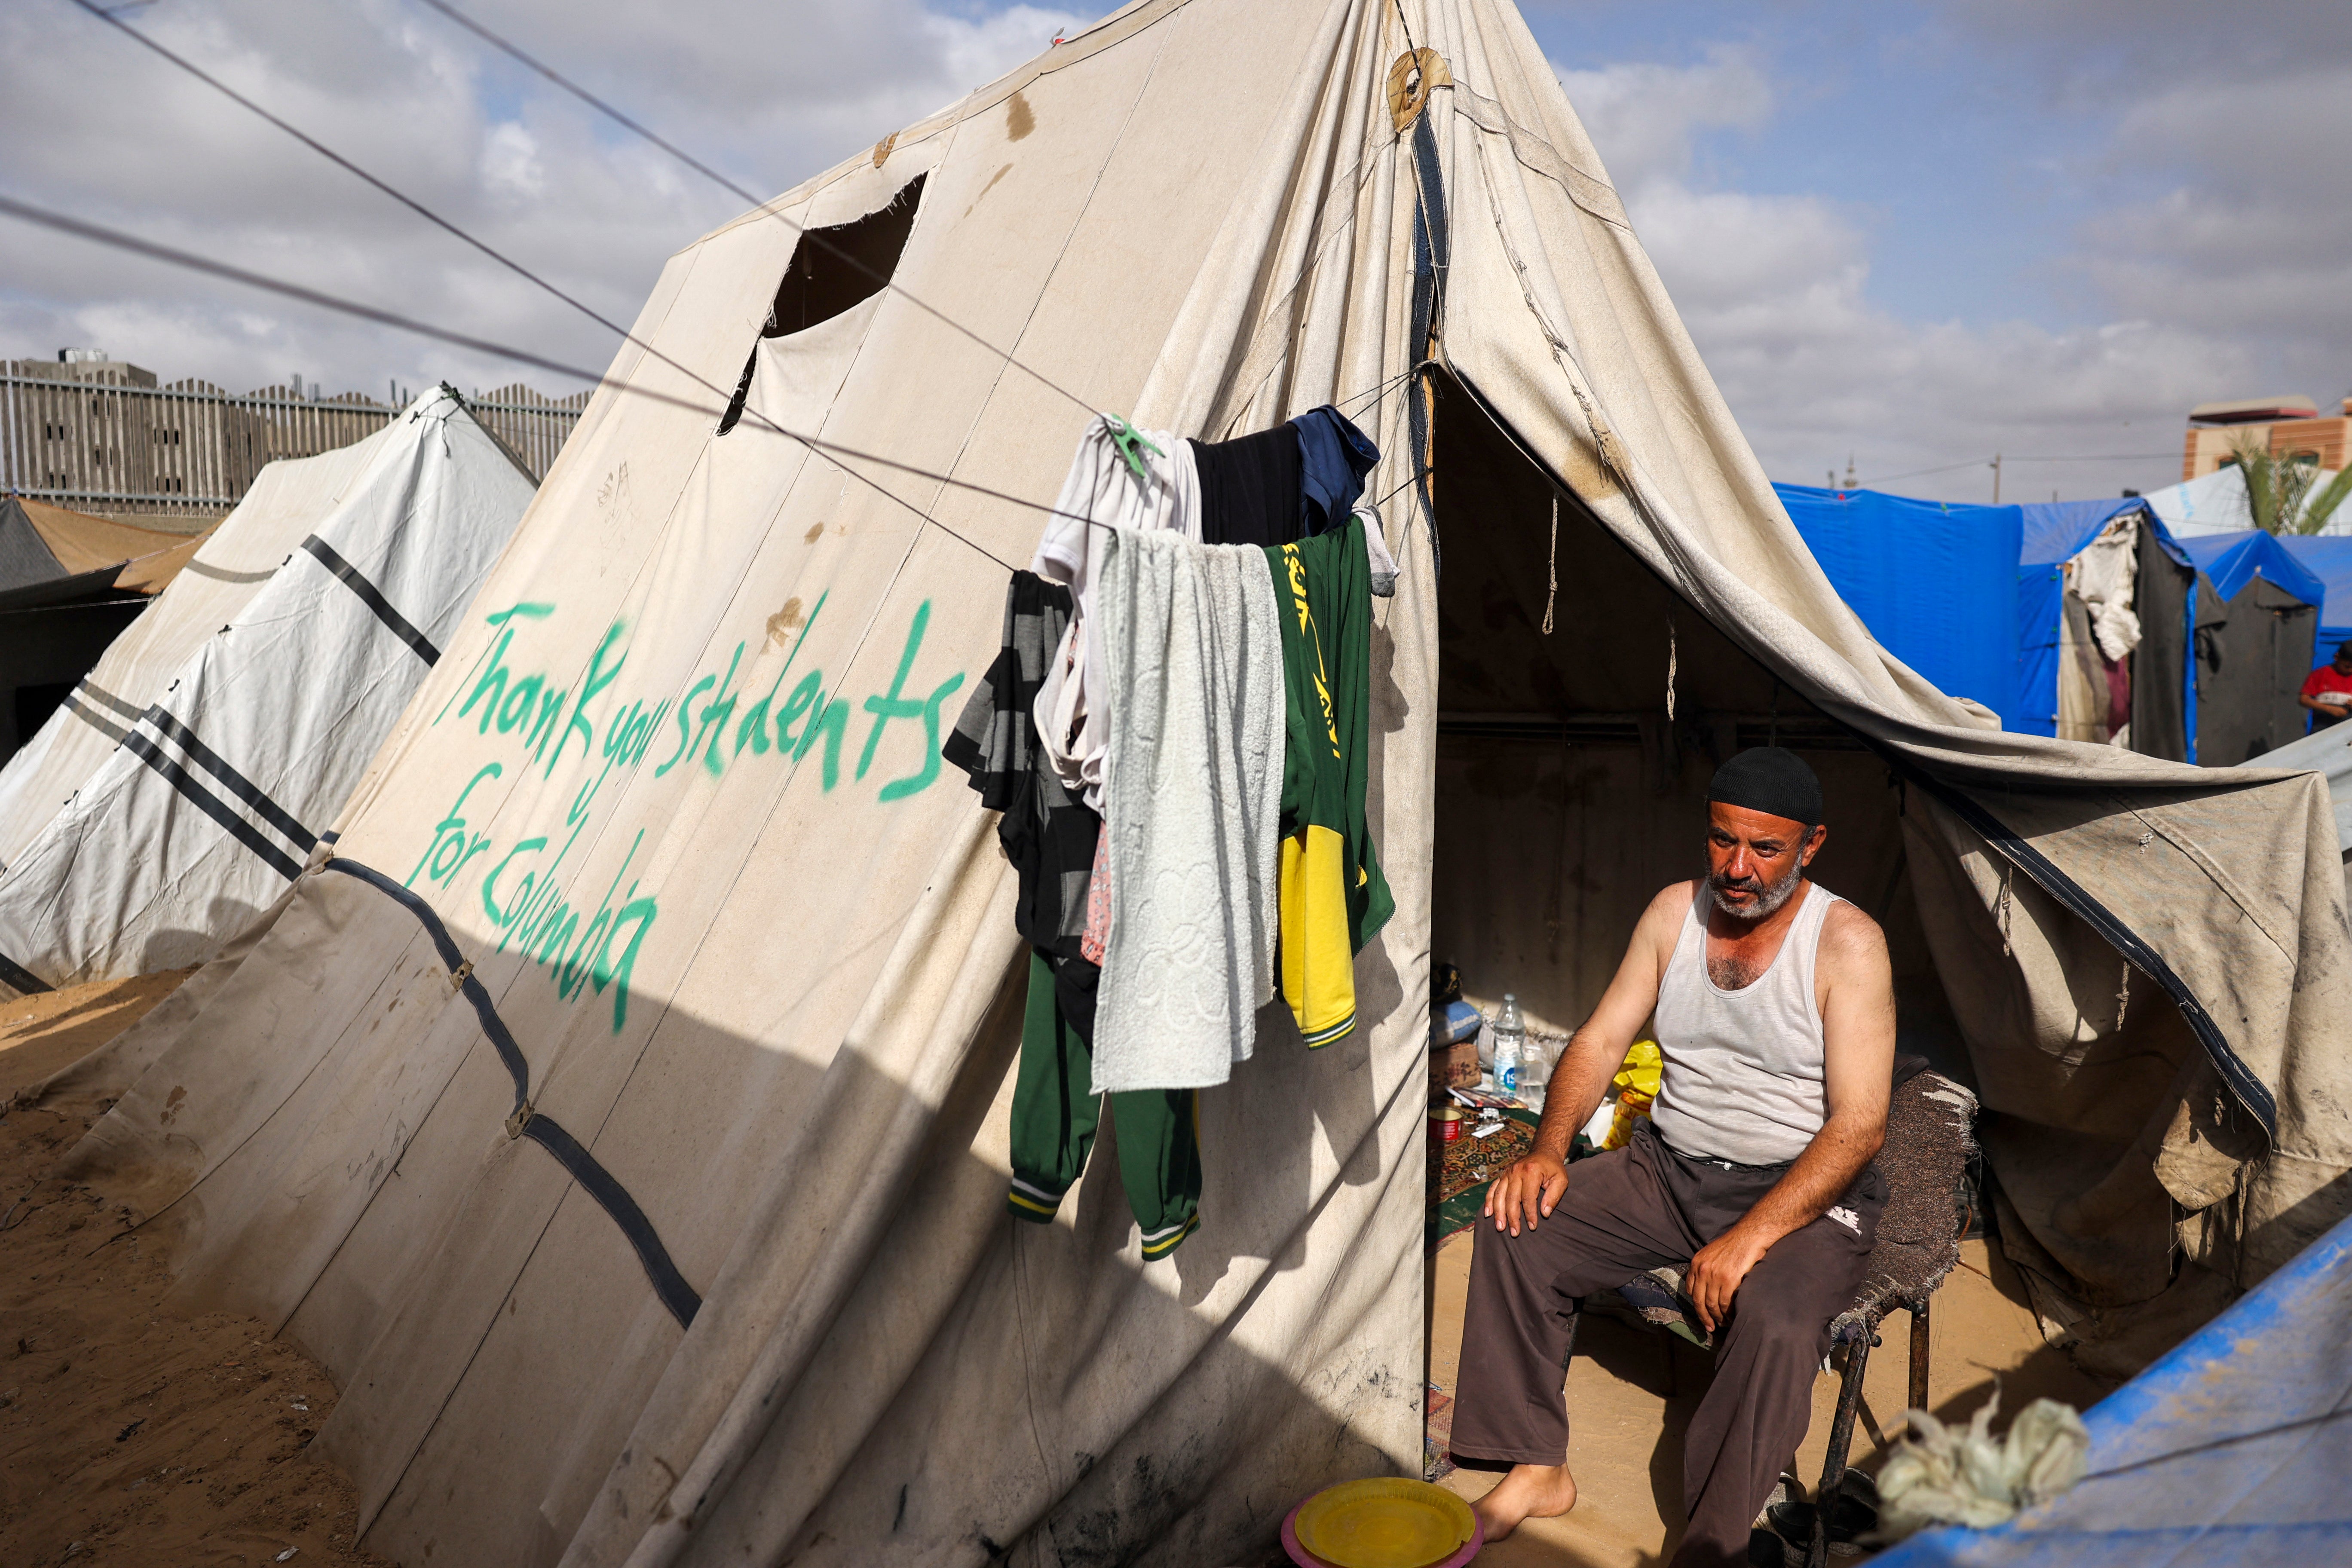 A man sits in Rafah in a tent with the message “thank you students for Columbia” painted on the side on 27 April. The New York Police Department has arrested hundreds of protesters at Columbia since their protests began on 17 April